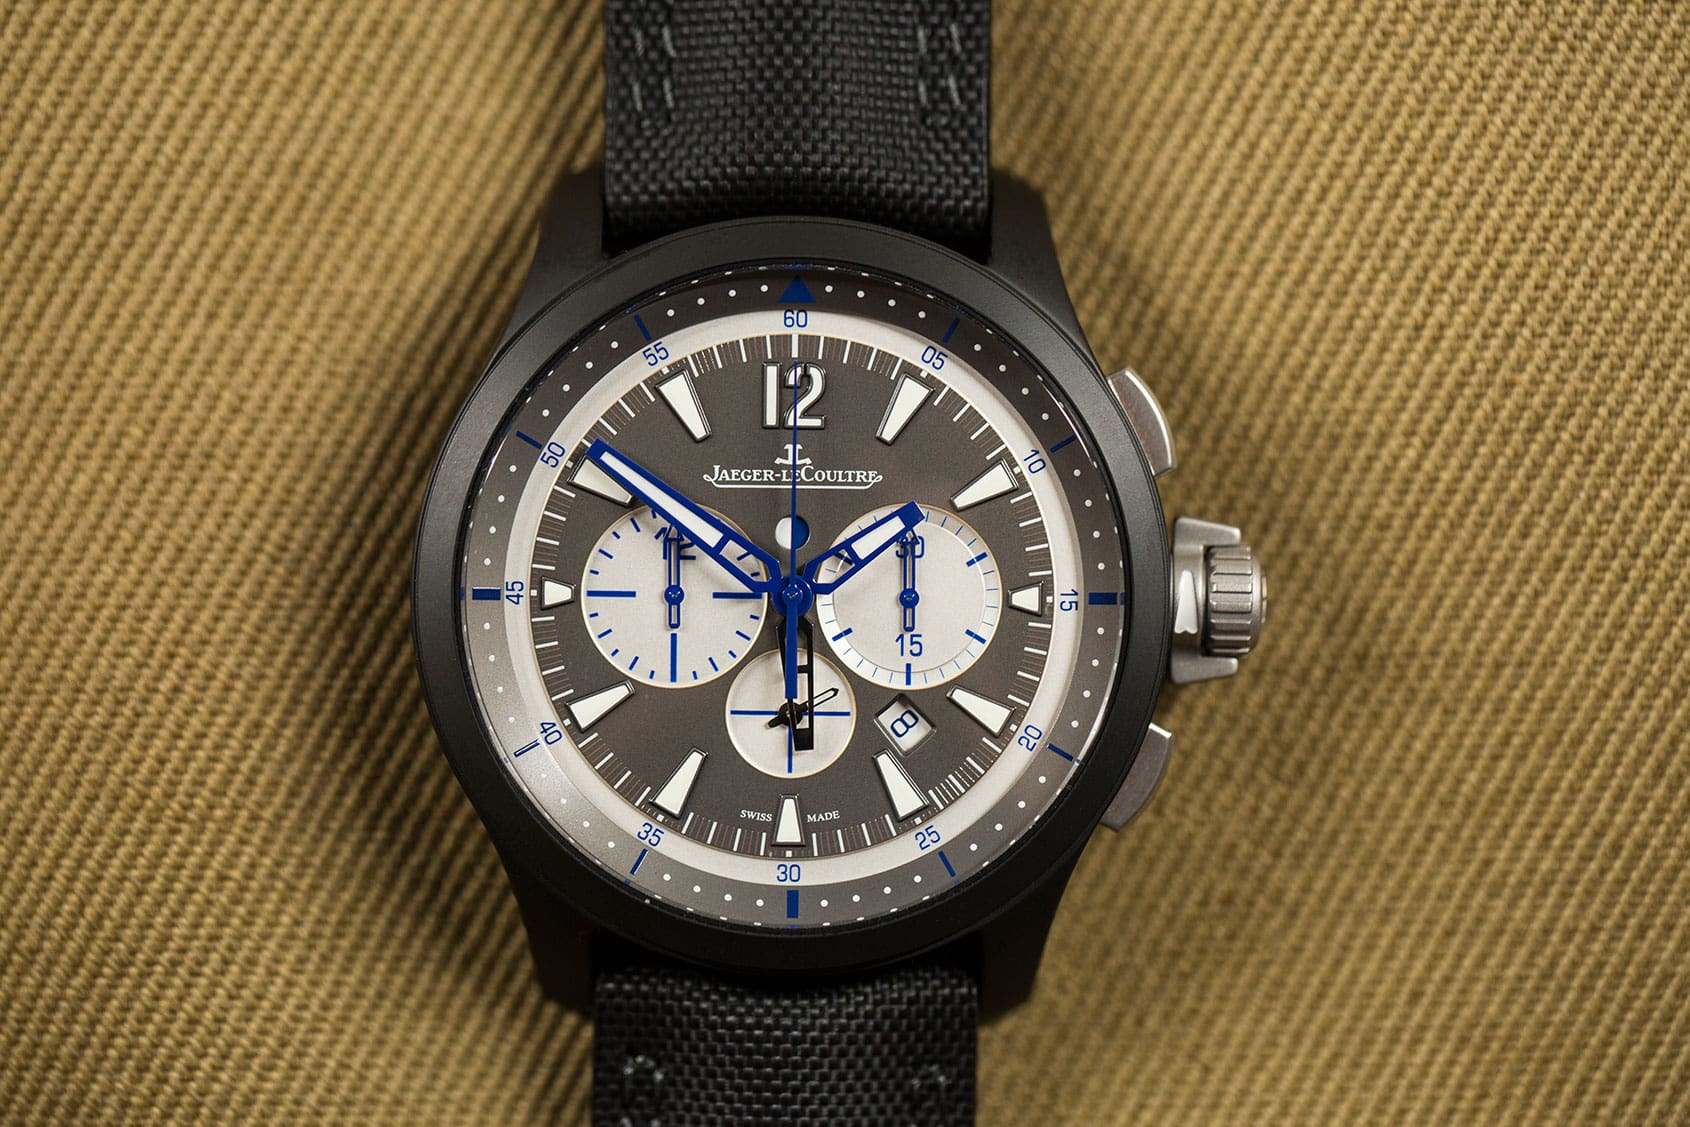 HANDS-ON: Jaeger-LeCoultre nails sports style with Master Compressor Chronograph Ceramic